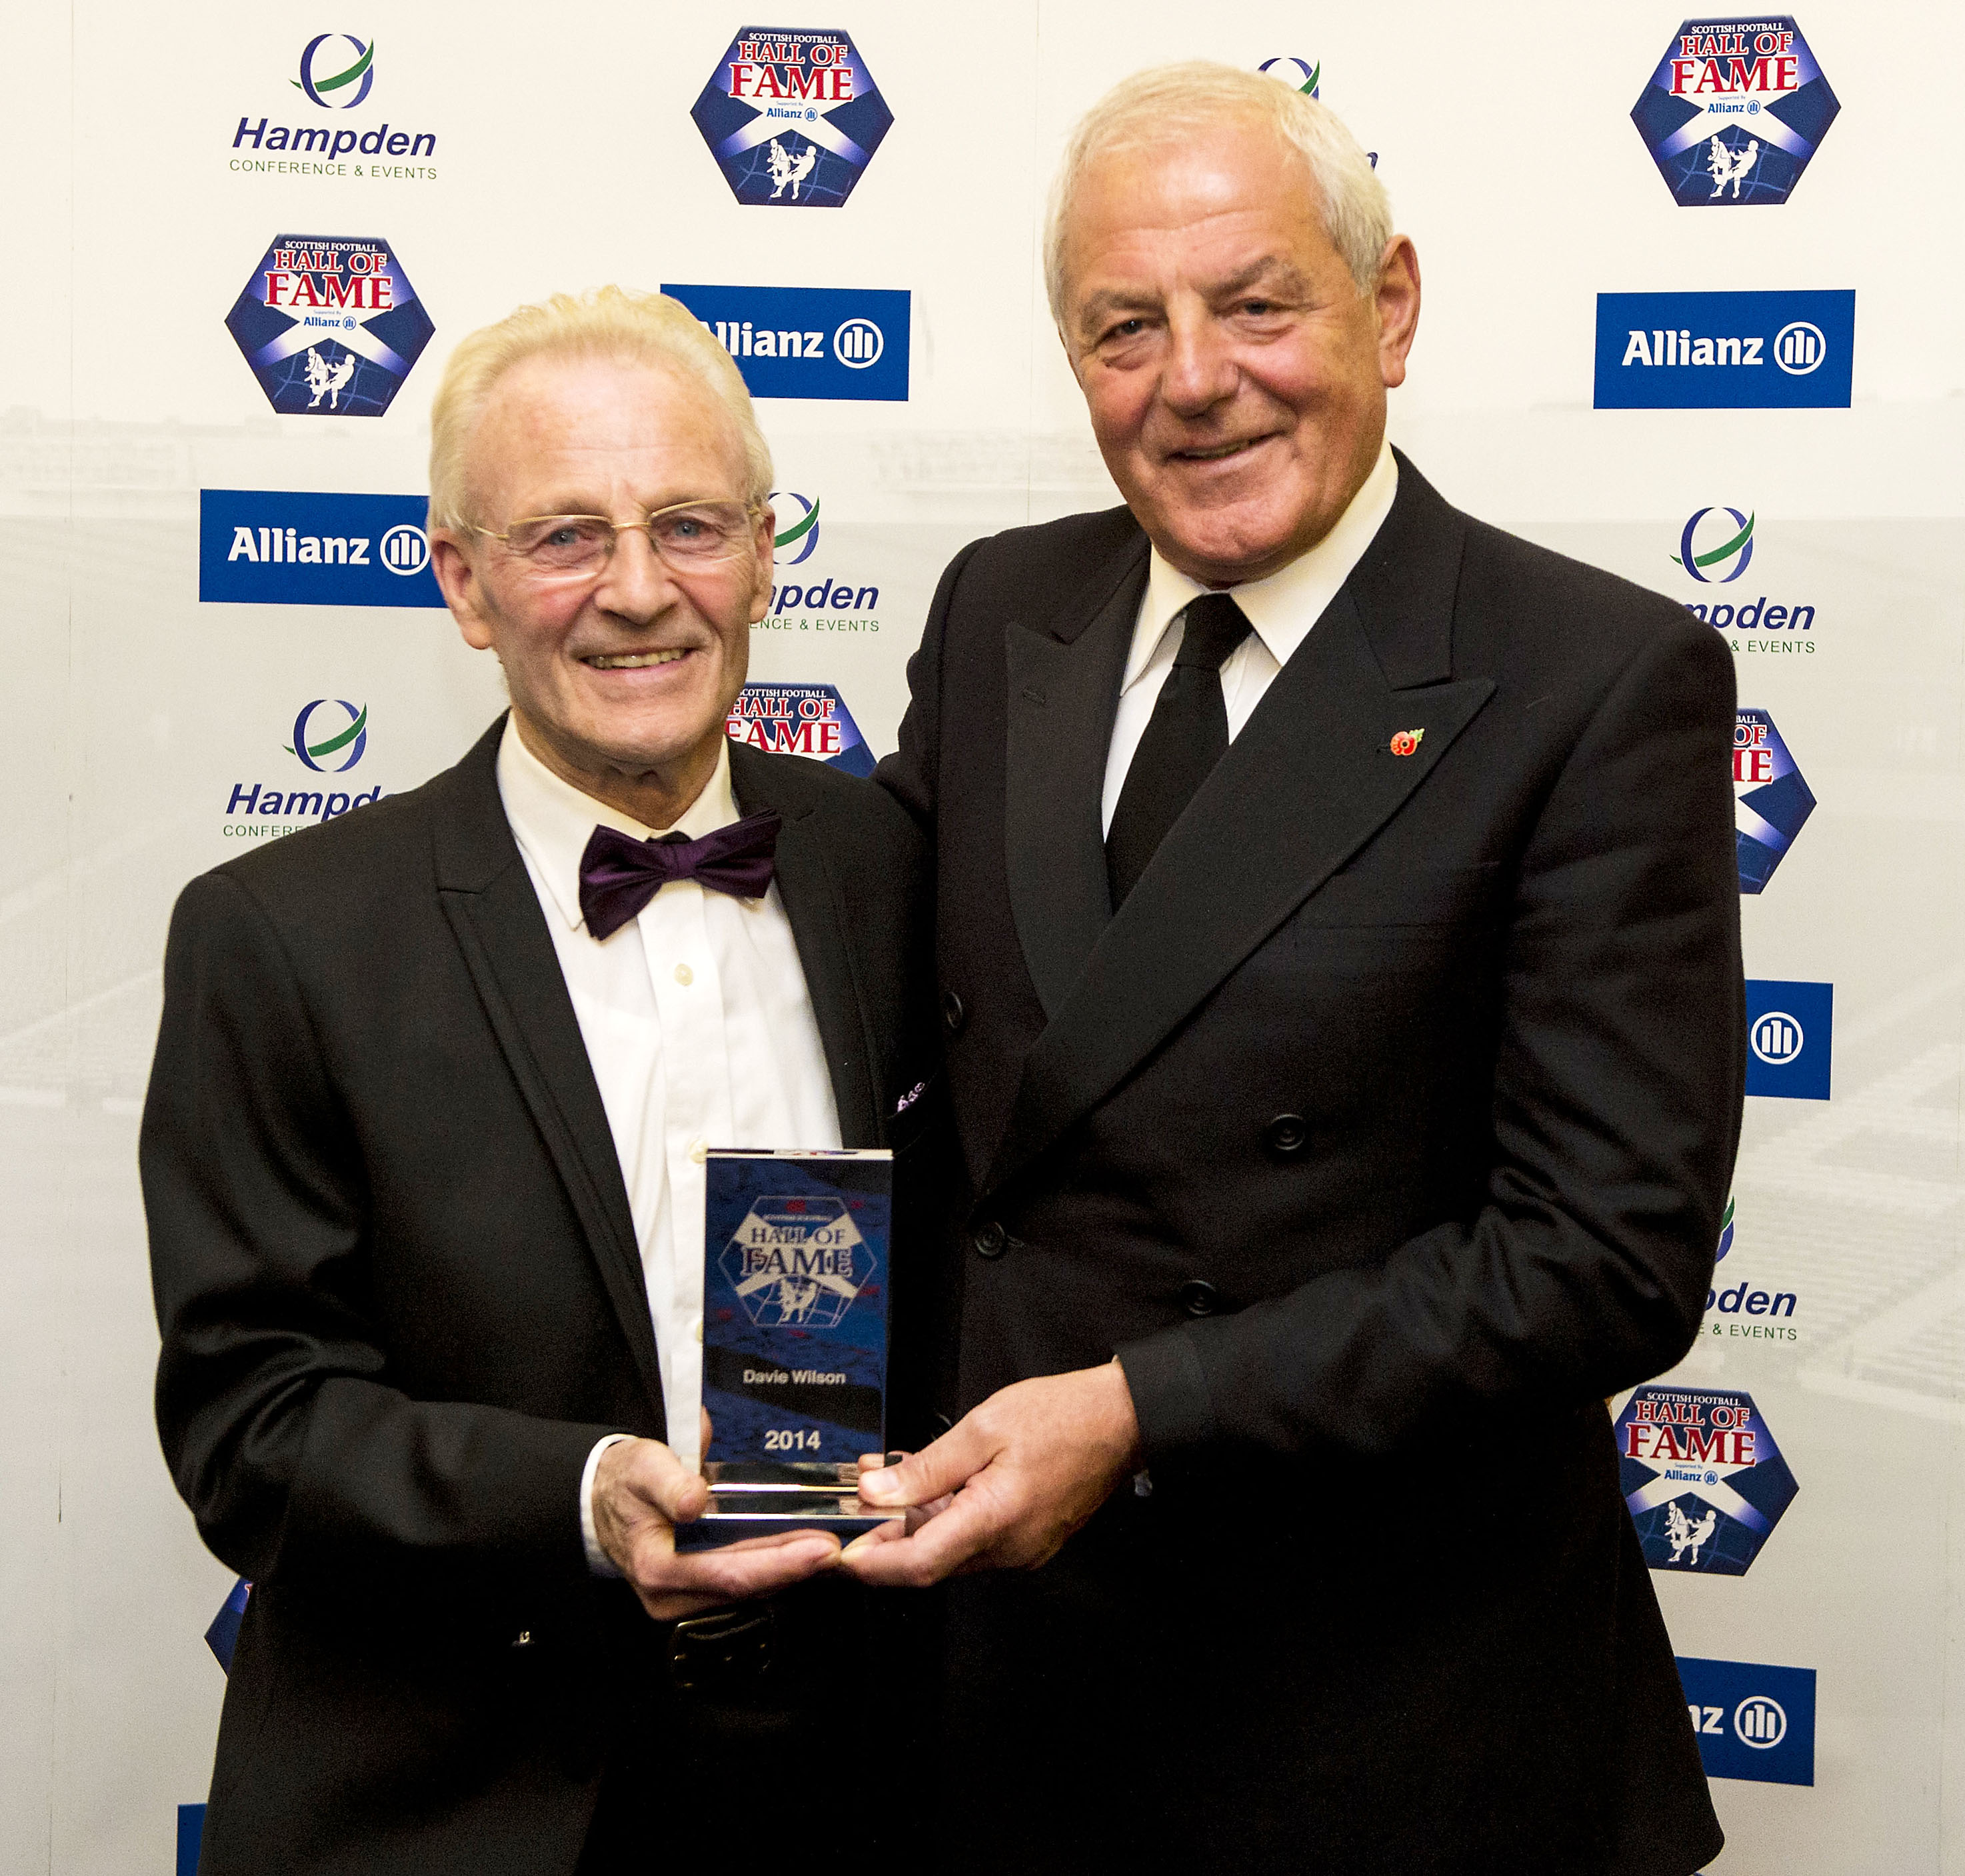 Davie Wilson is presented with his award by former Rangers and Scotland manager Walter Smith as he is inducted into the Scottish Football Hall of Fame in 2014.